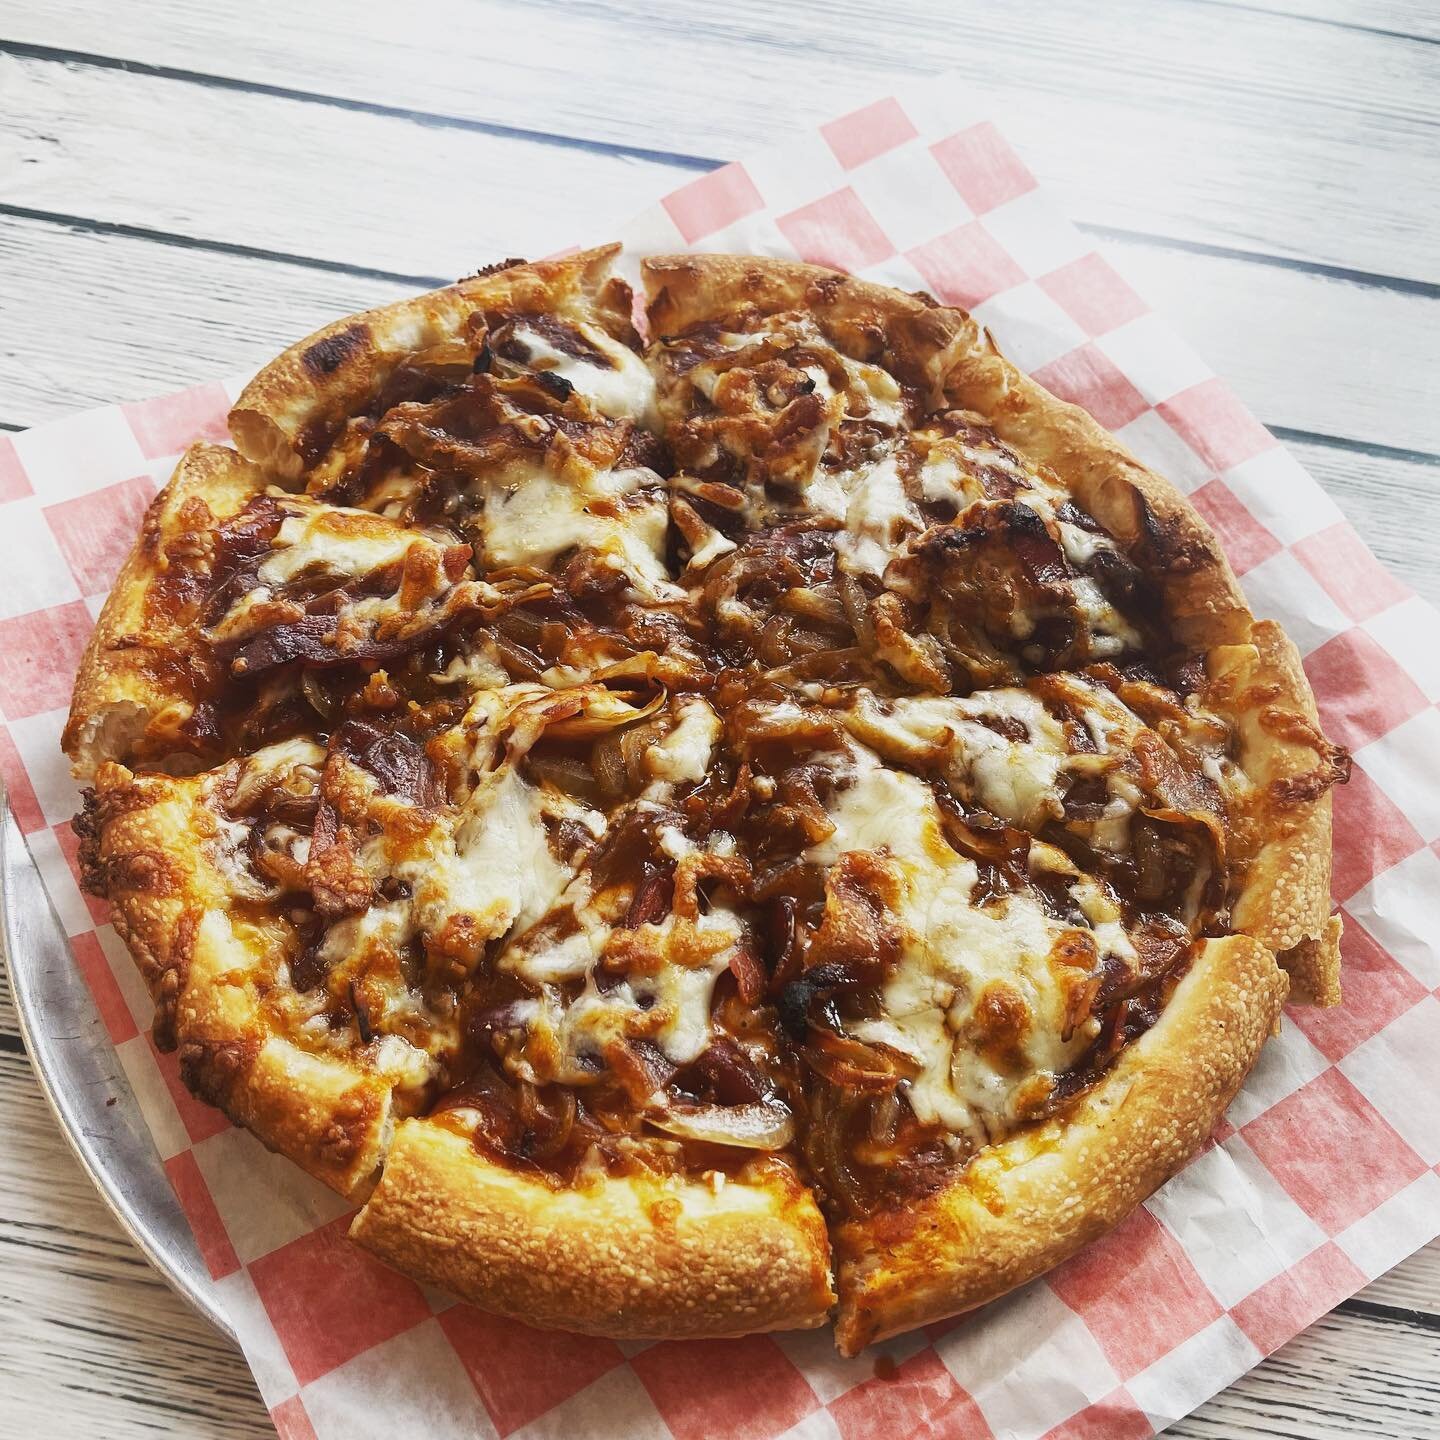 &ldquo;Alright alright alright!&rdquo; Come on down to Hercules and get your Dazed and Confused pizza! With barbecue sauce, chili, mozzarella, cheddar, onions, and bacon.